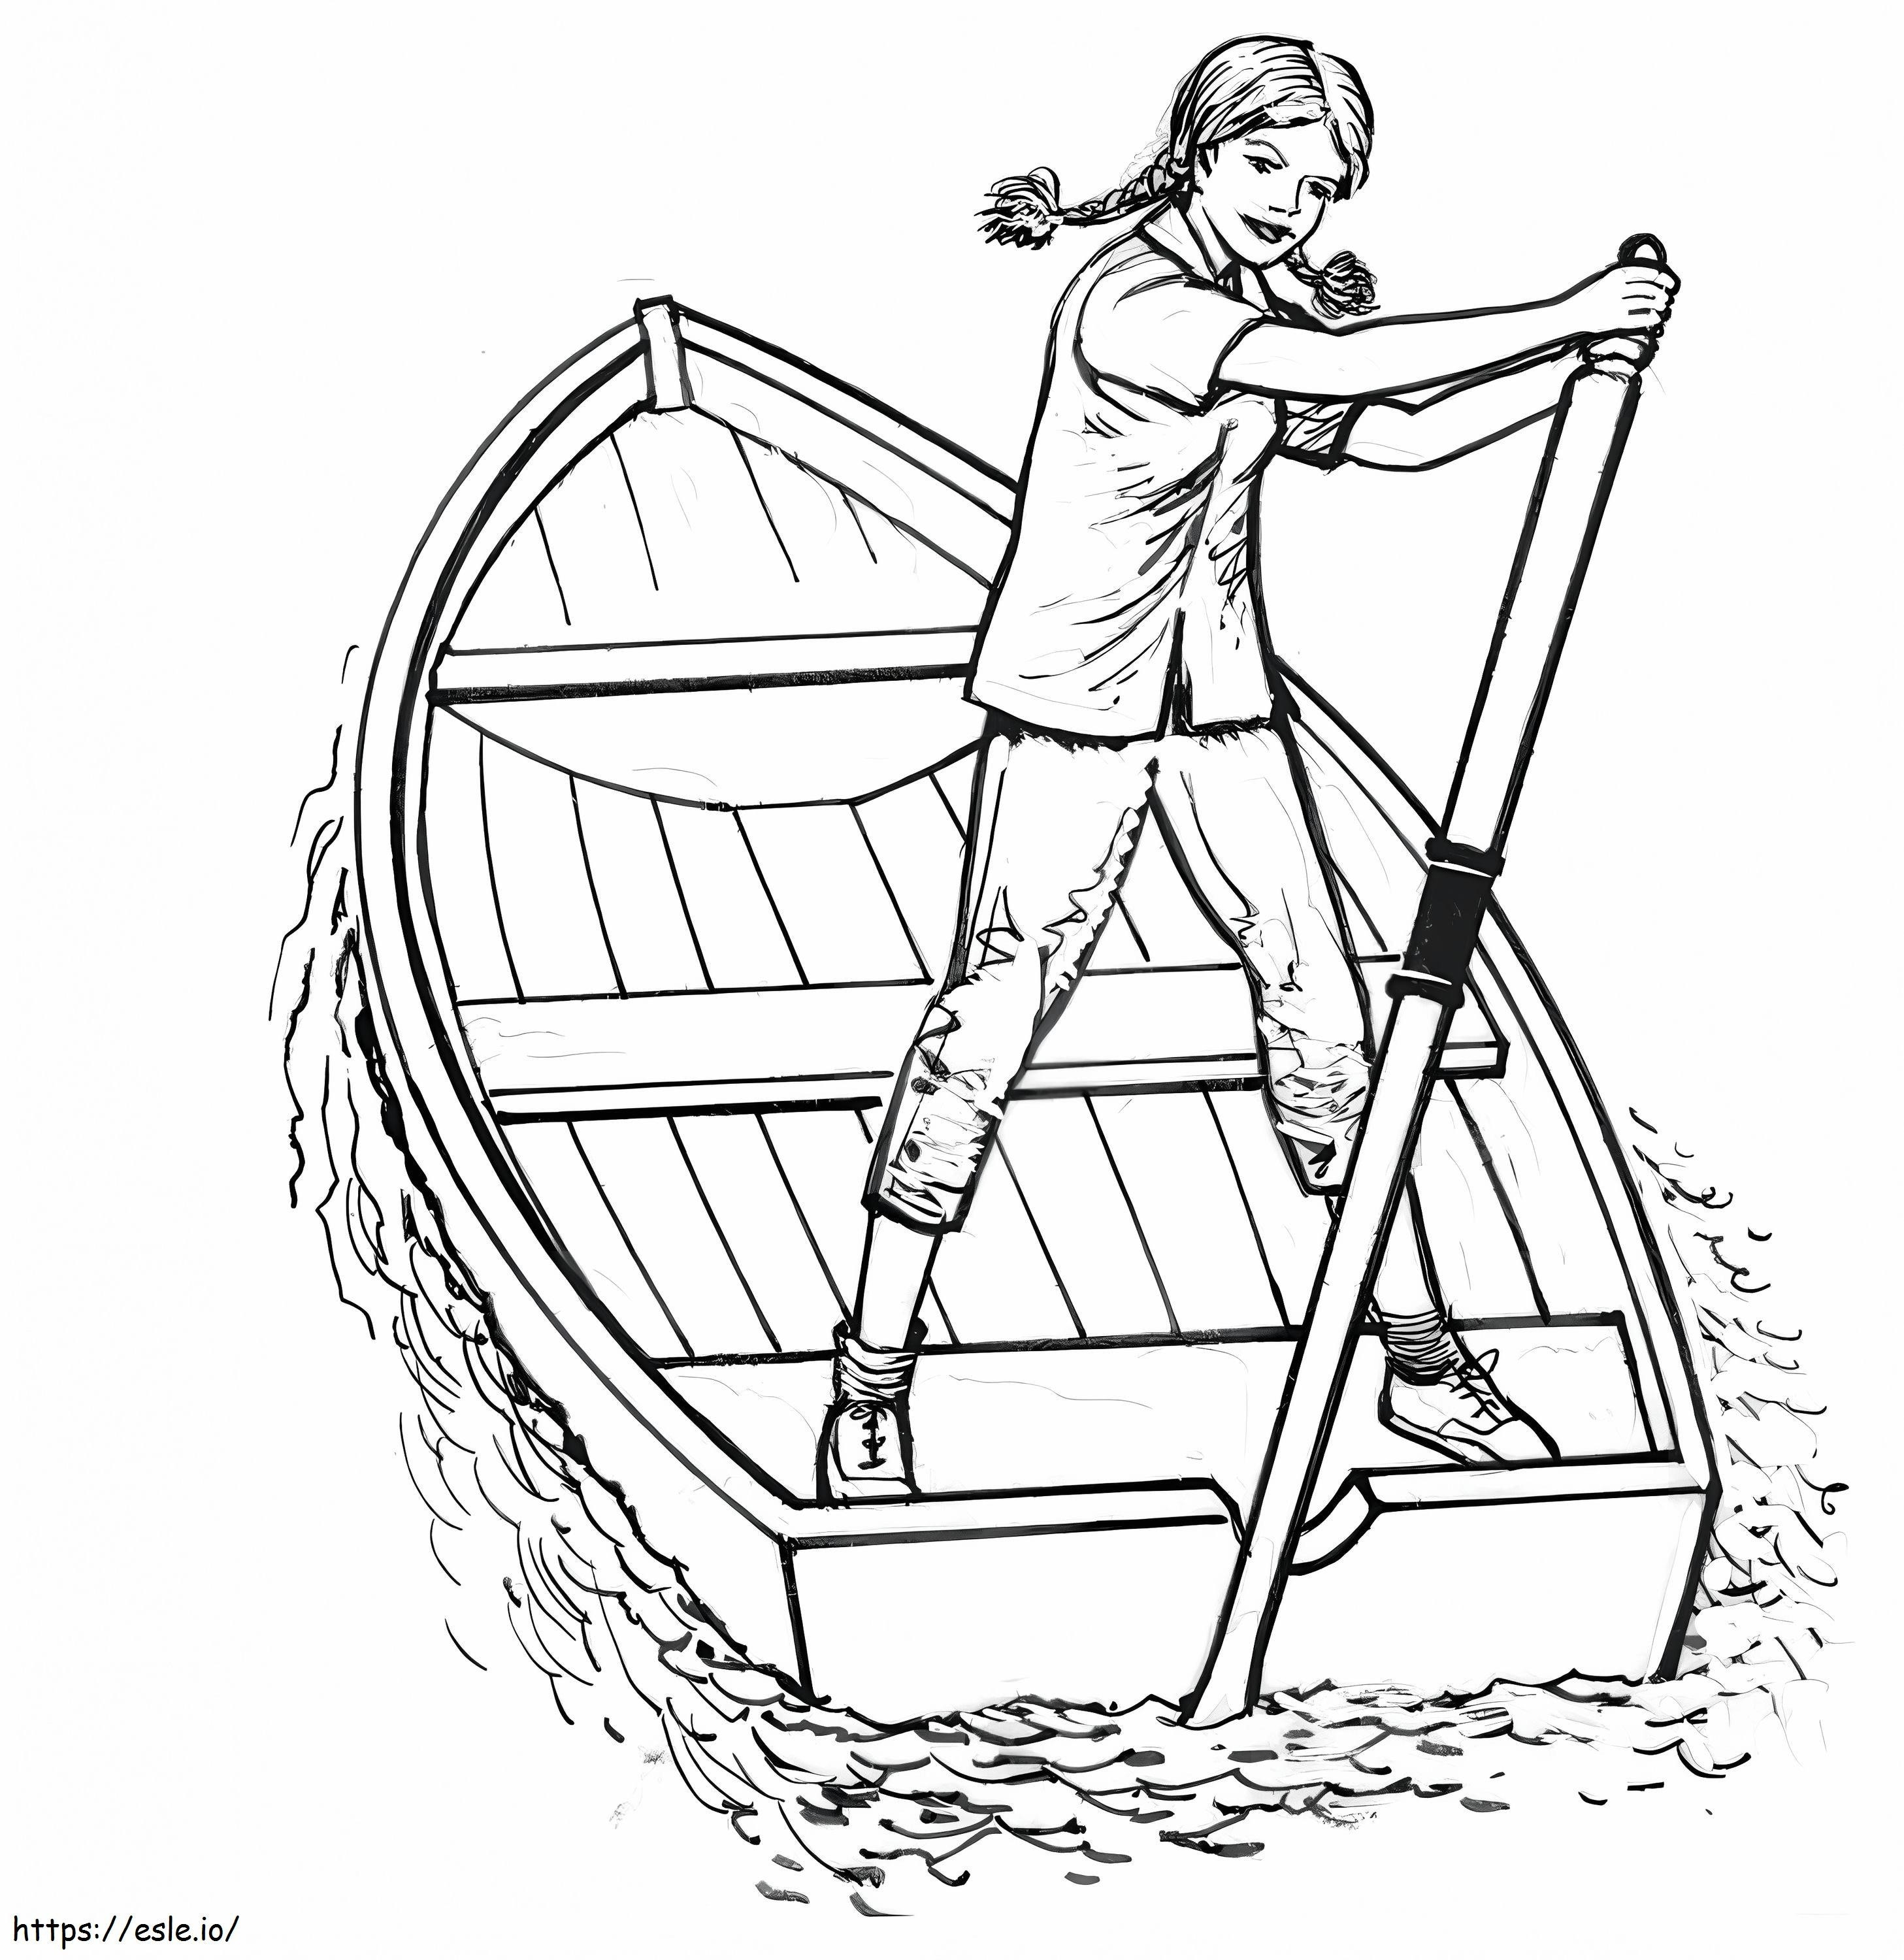 1560759254 Girl Rowing Boat A4 coloring page